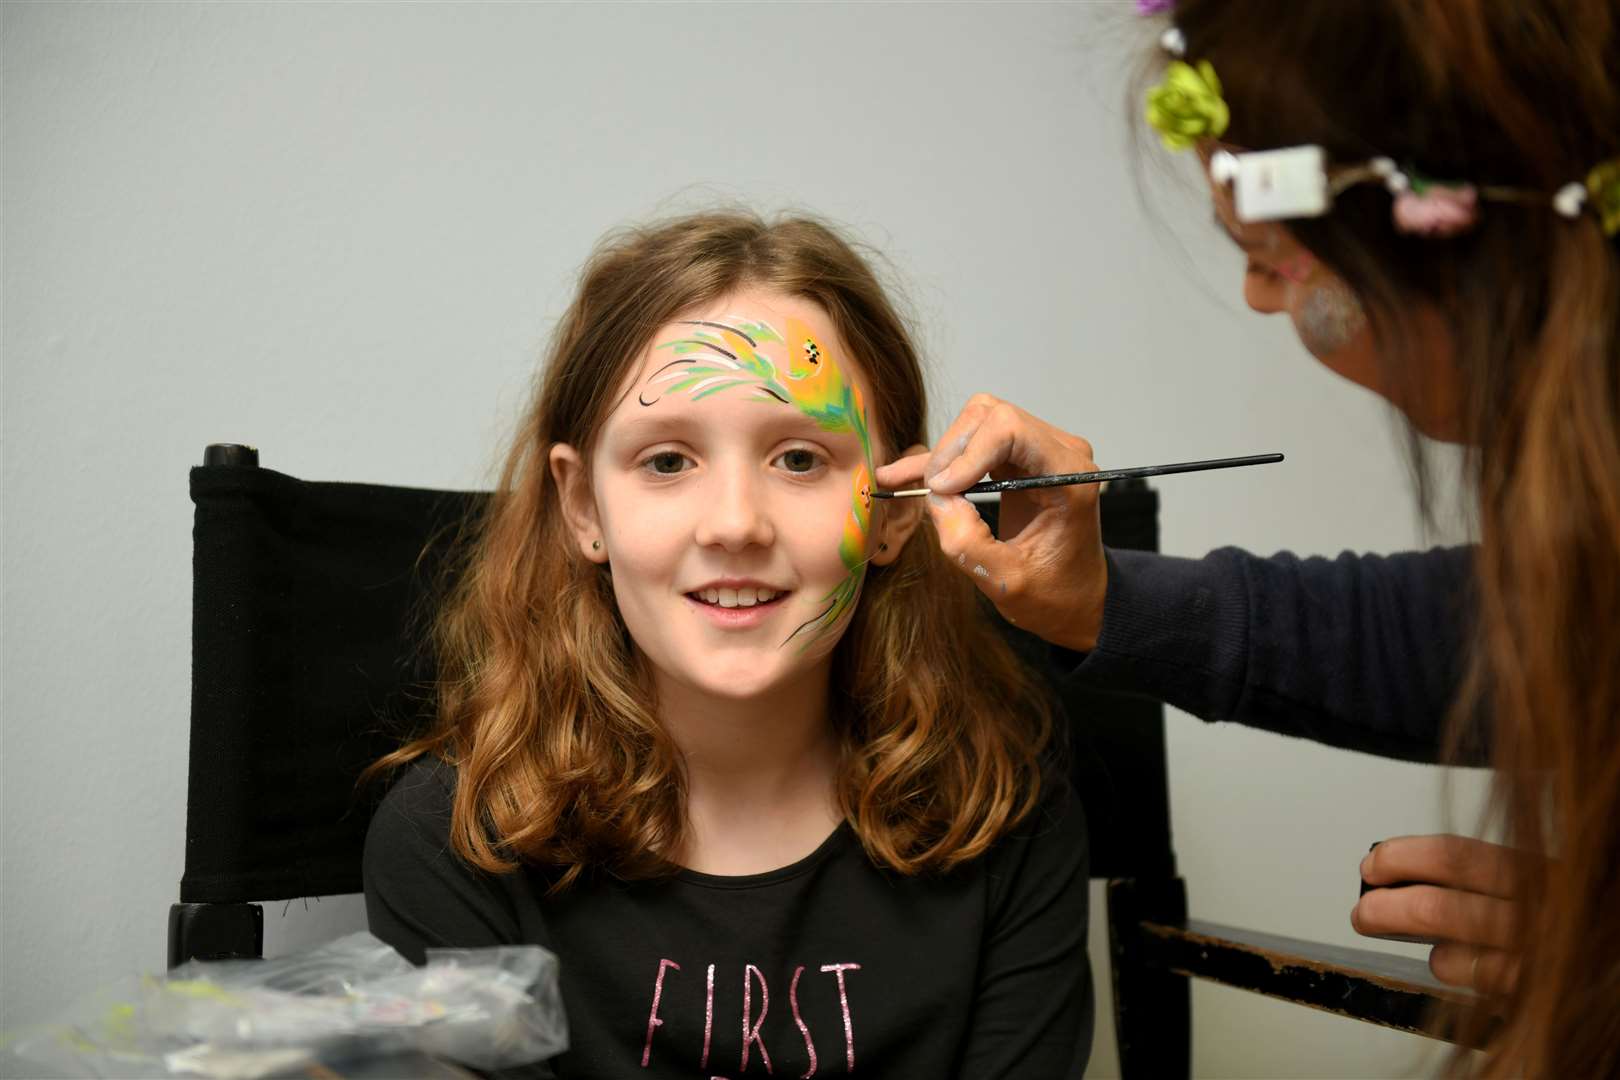 Chloe McIvor getting her face painted. Picture: James Mackenzie.